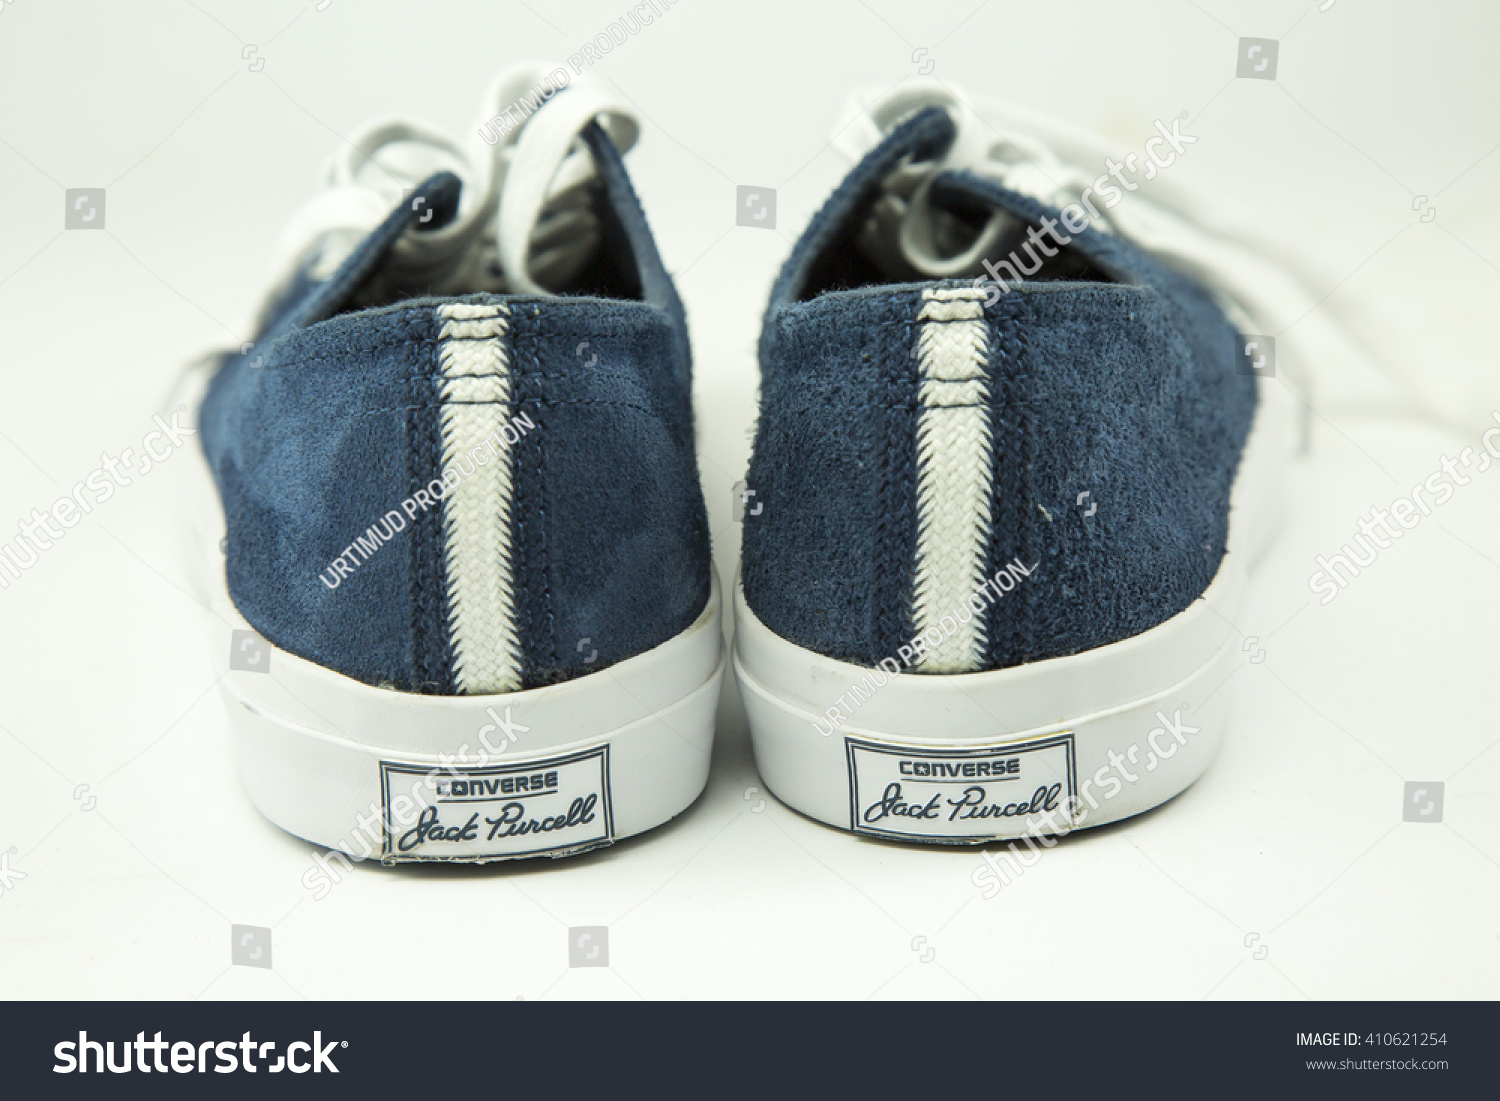 converse jack purcell model